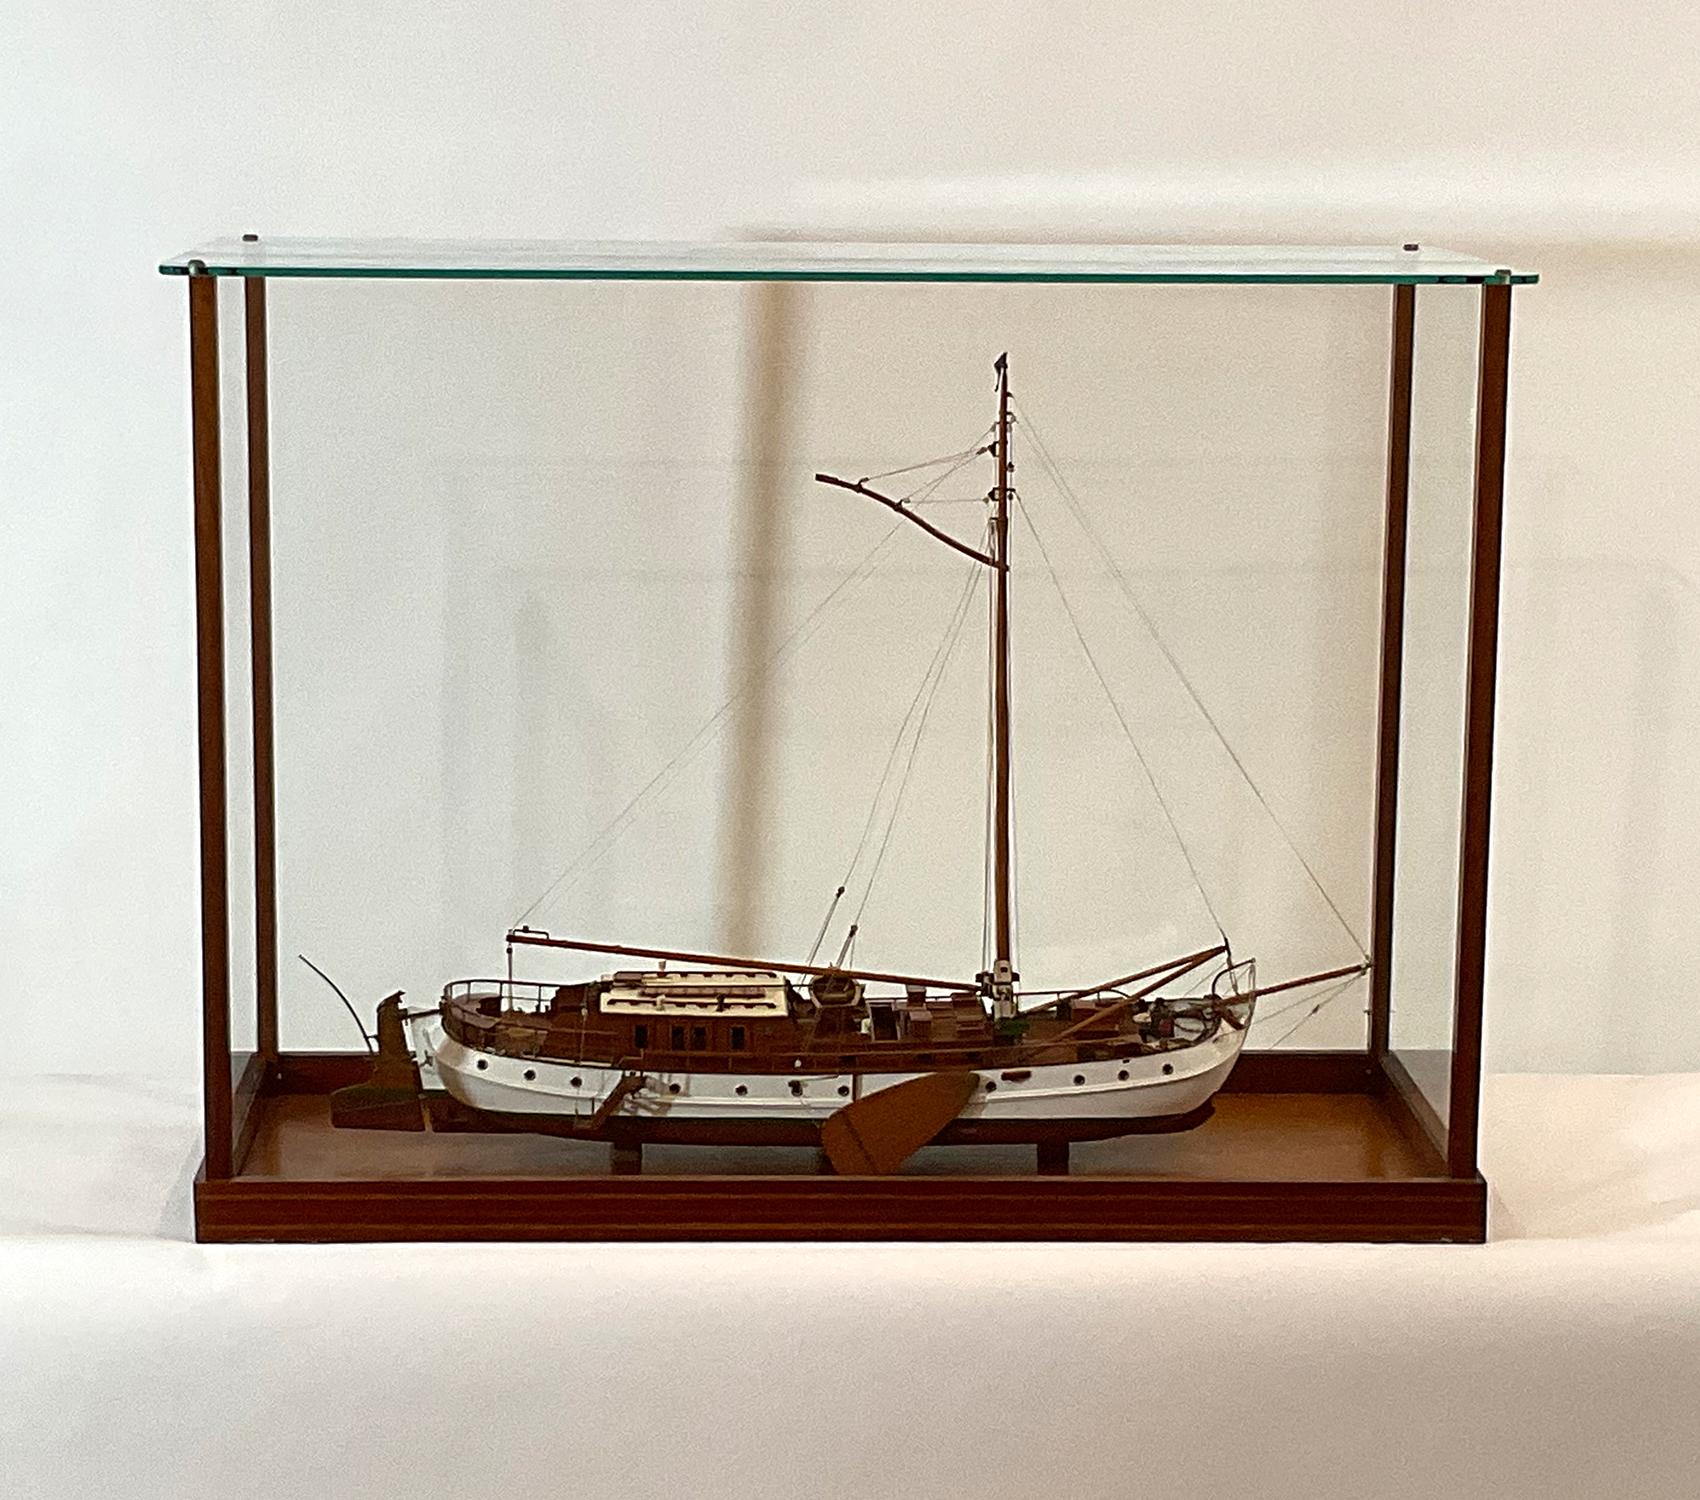 Very fine scale model of a Dutch Lee boarder. With mahogany deck and cabin, launch, spars, grab rails, etc. Details include rope coils, stove pipes, skylights, winch, chain, anchors, chocks, gangway, benches, etc. Expertly rigged custom